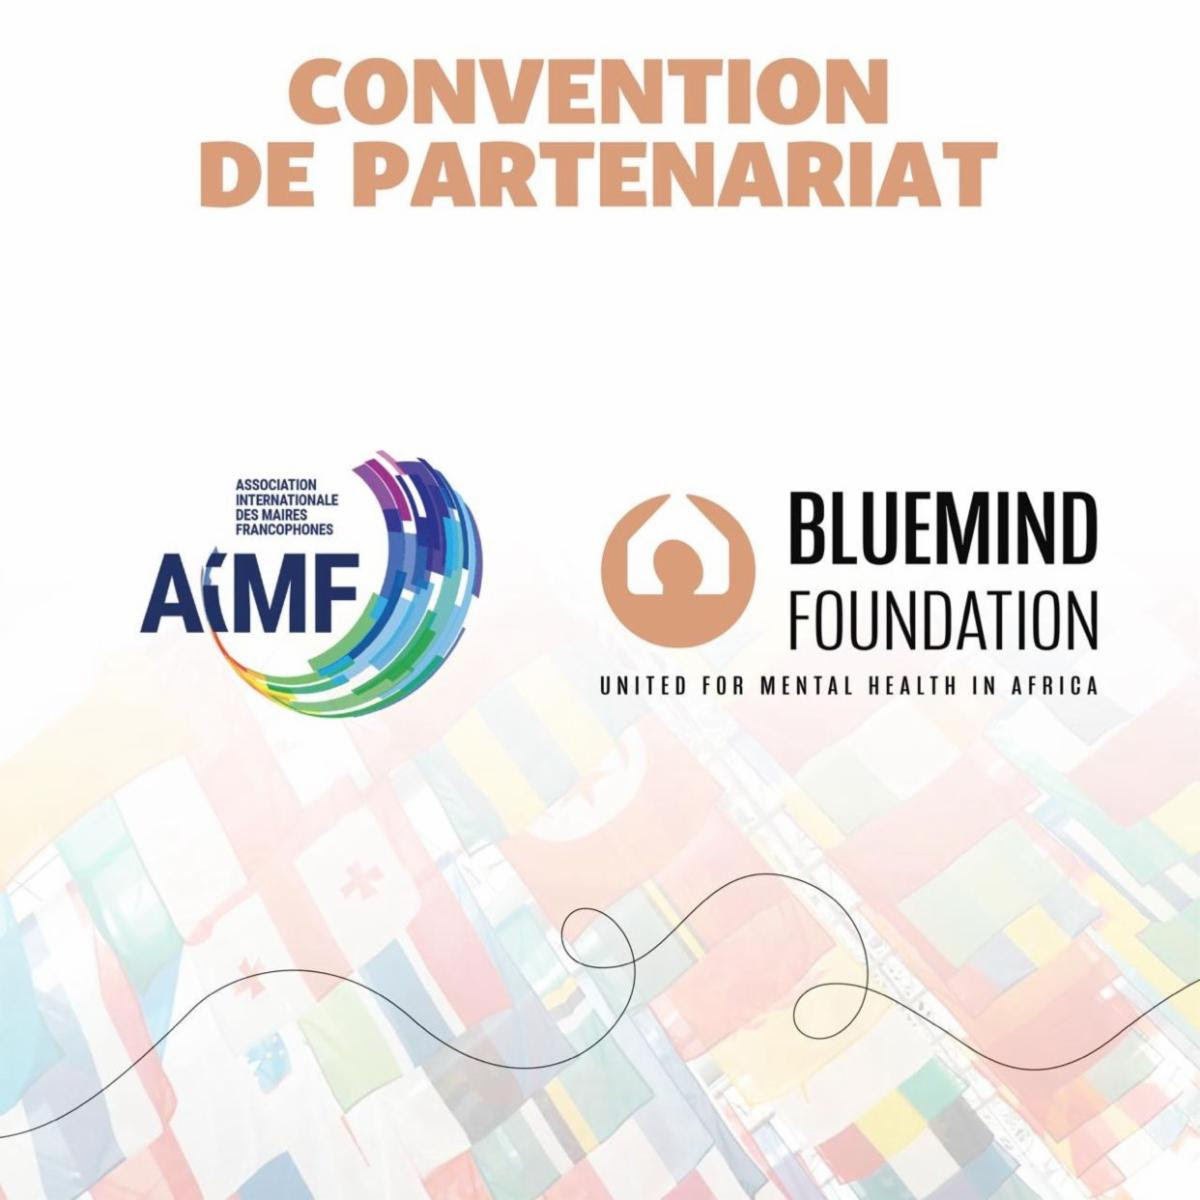 The Bluemind Foundation and the AIMF launch the “Villes Bleues” initiative to promote mental well-being in French-speaking cities – Capsud.net